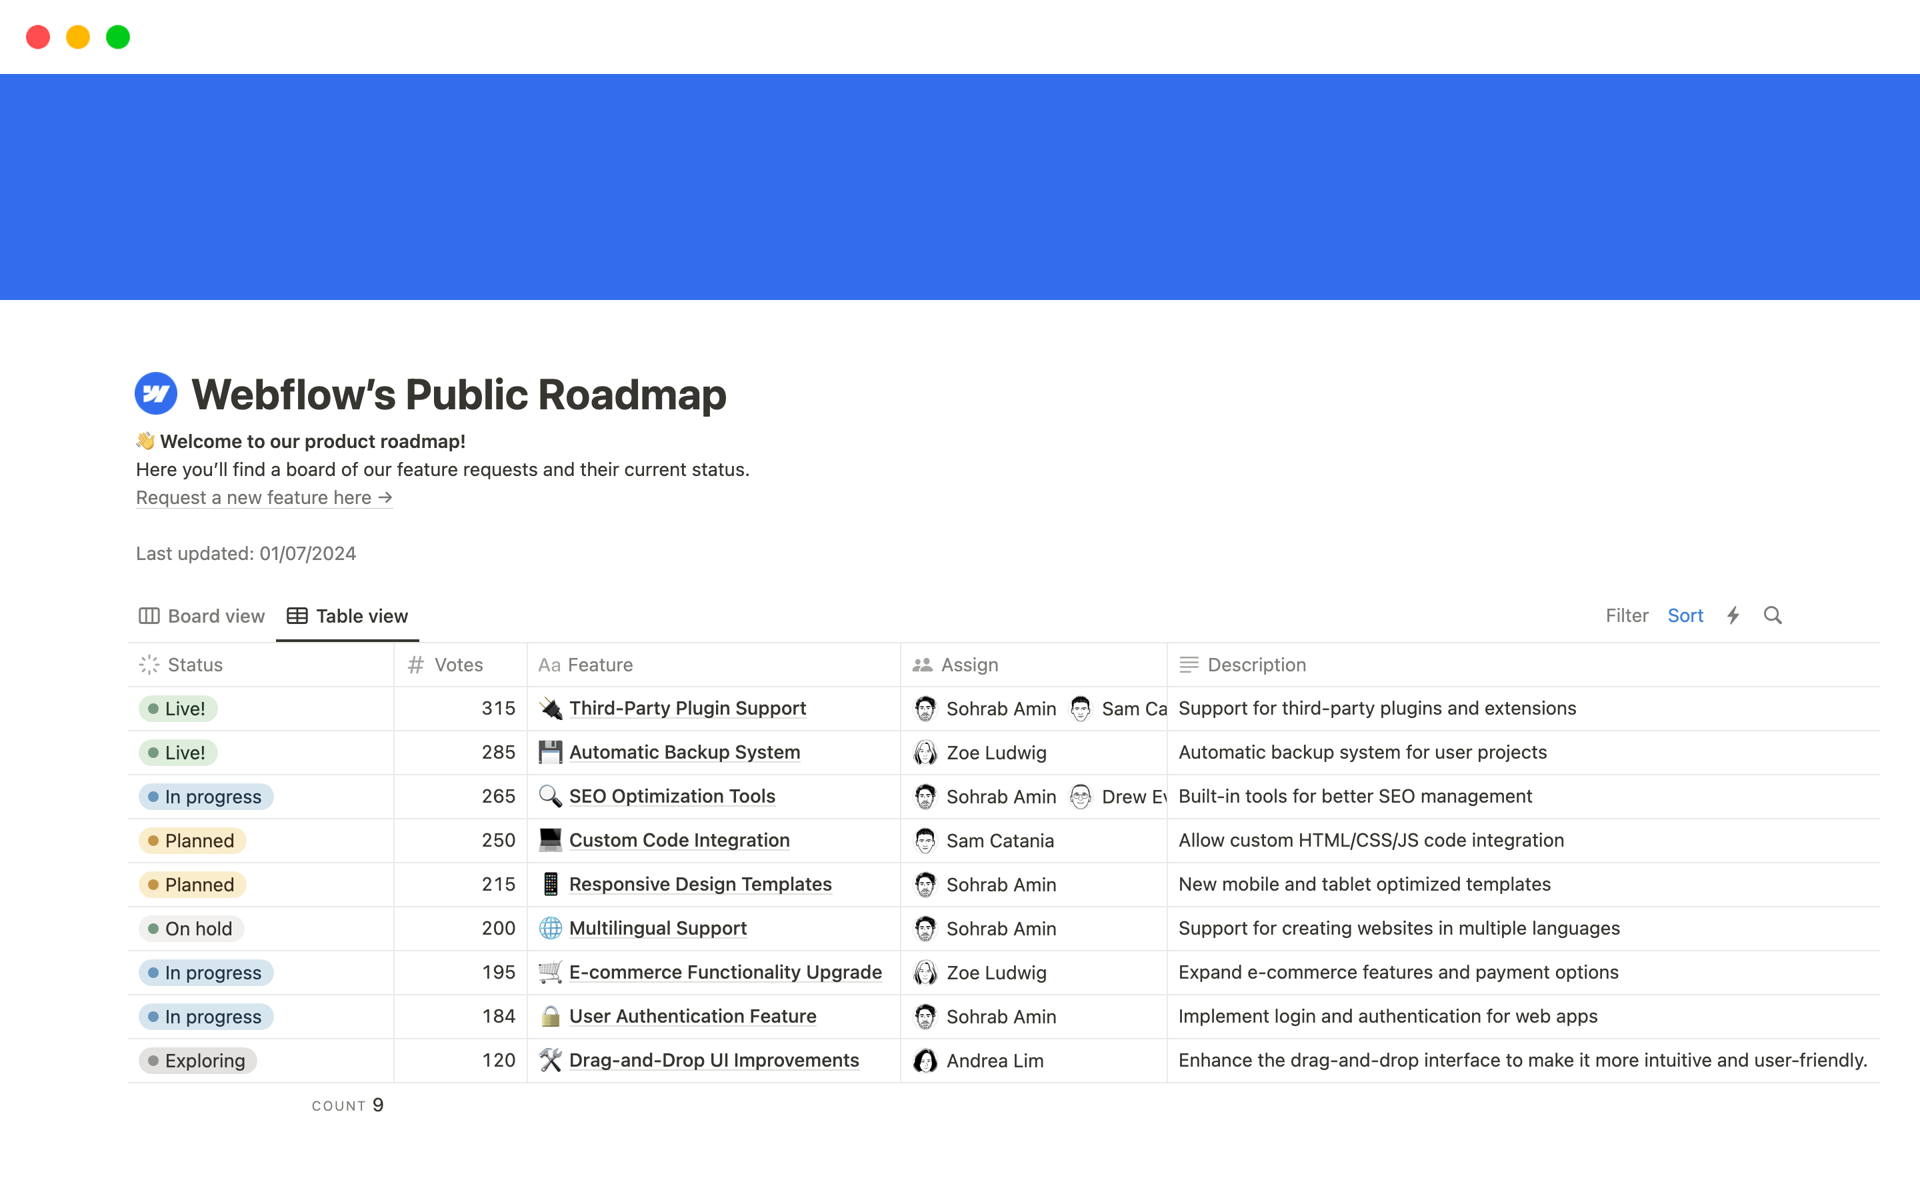 Webflow’s Public Roadmap template offers an interactive, transparent view of your product’s development journey. Track and showcase feature progress, votes, and team assignments in a comprehensive, public-facing format.